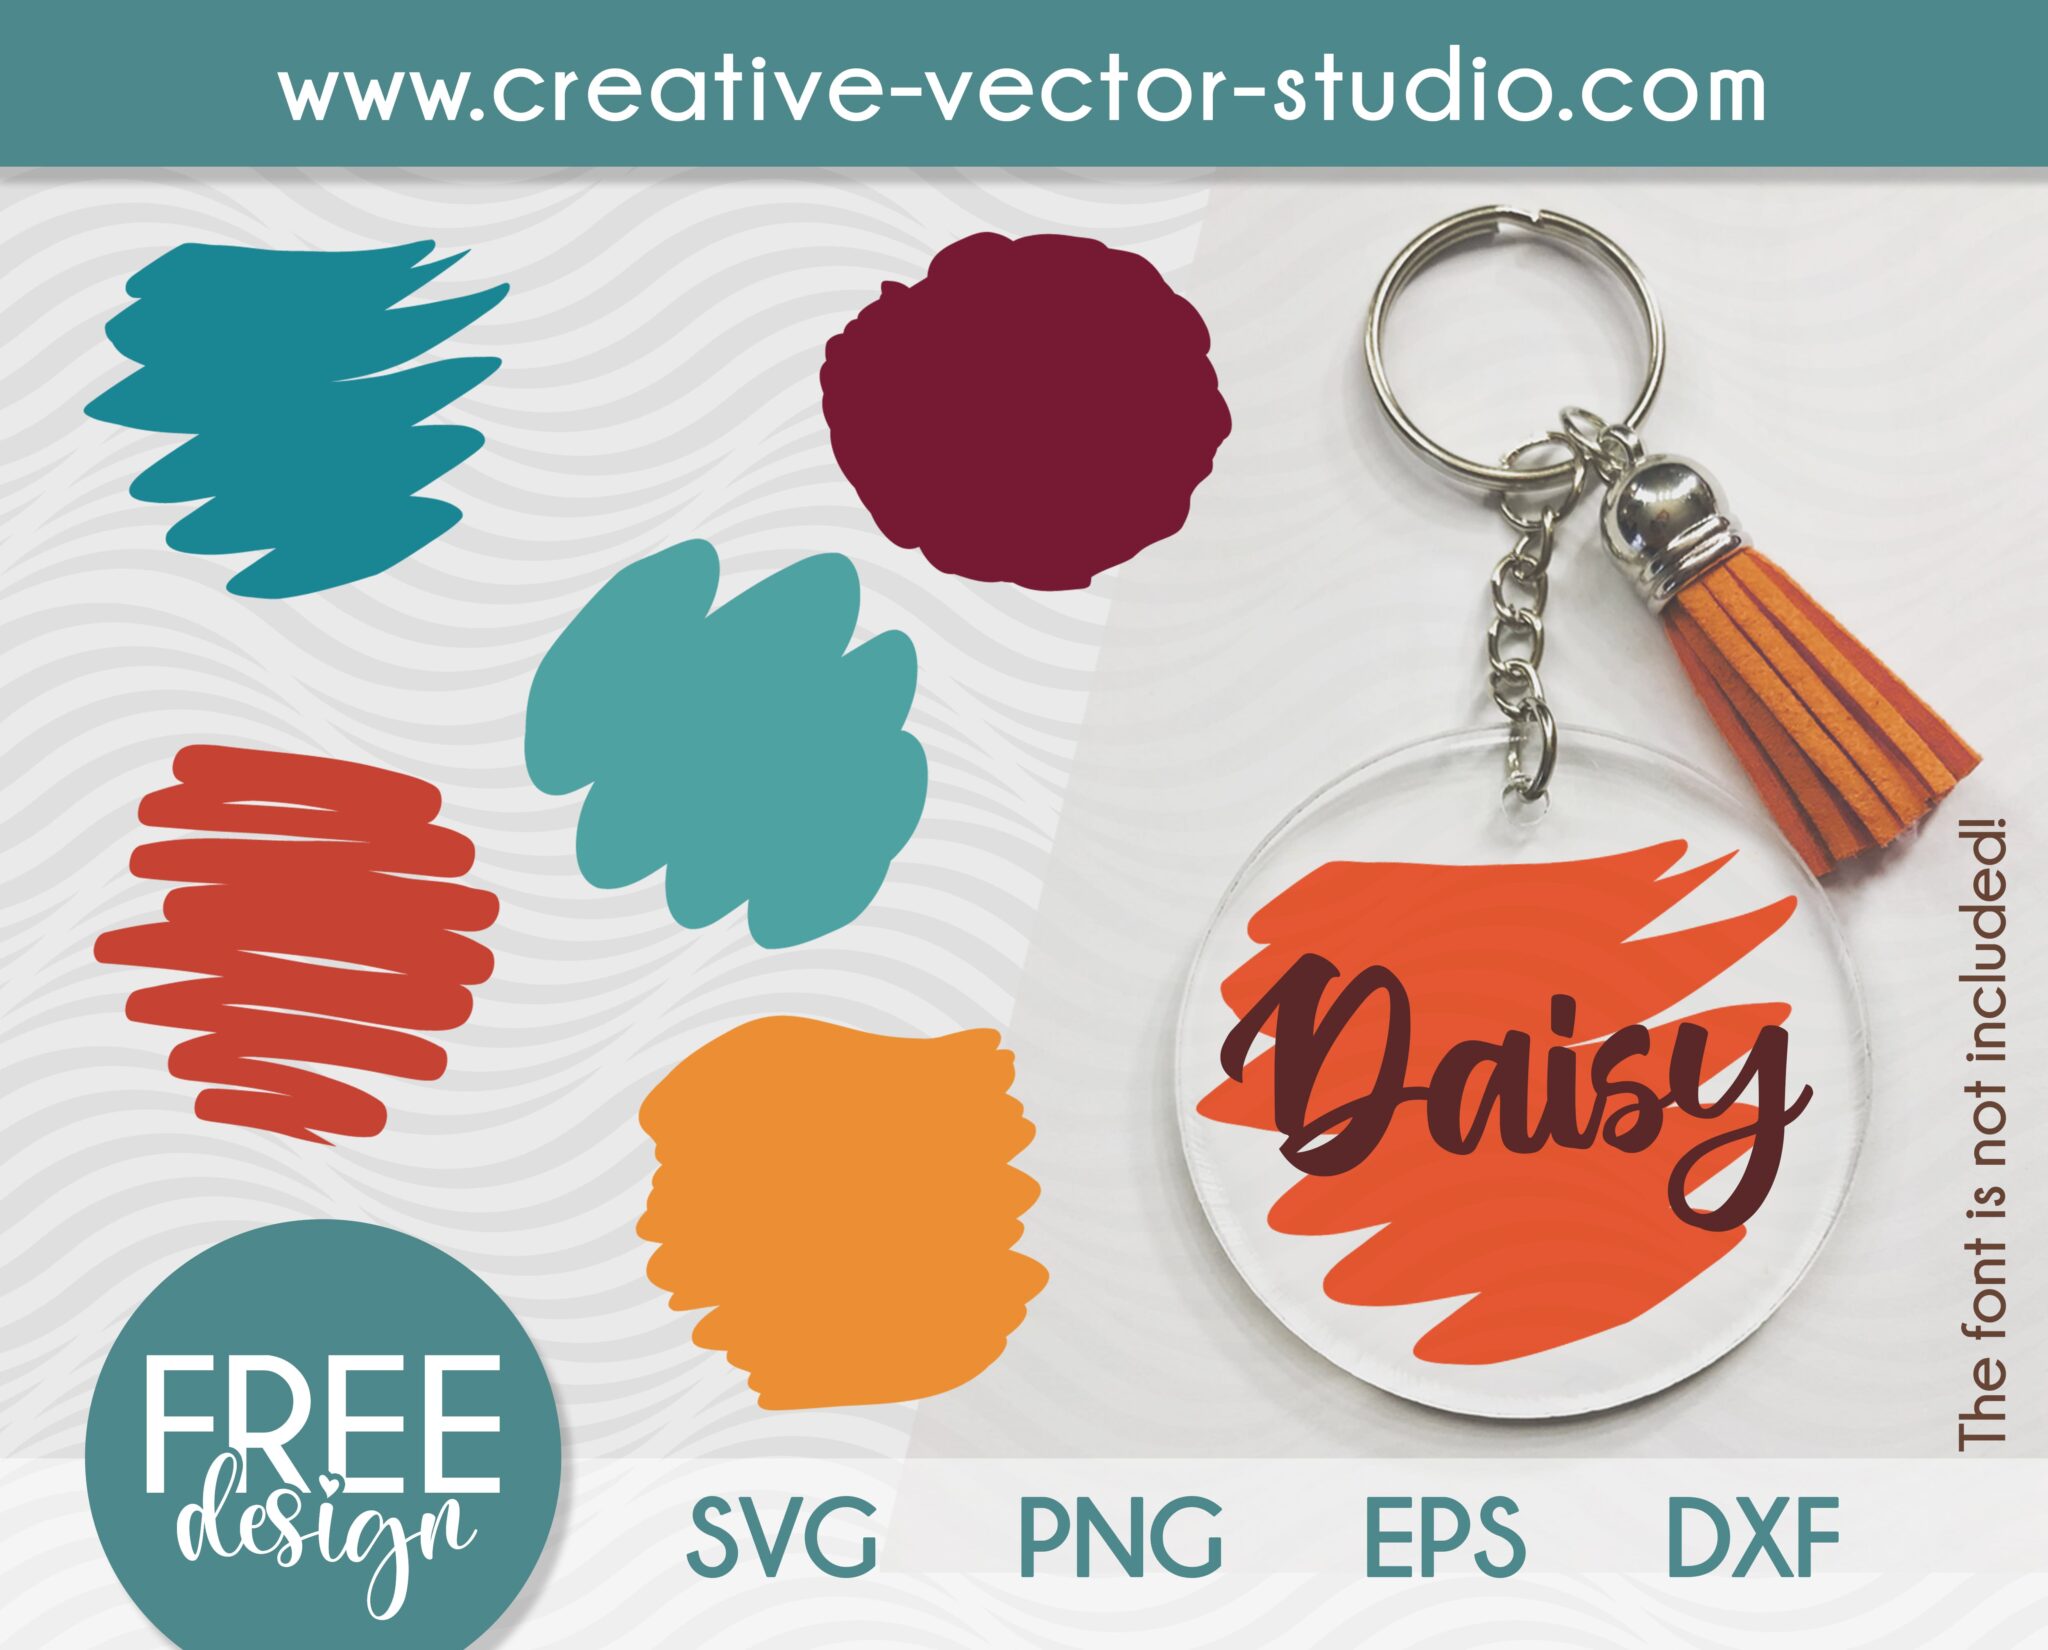 Free Paint Brush Stroke SVG, PNG, DXF, EPS | Creative Vector Studio